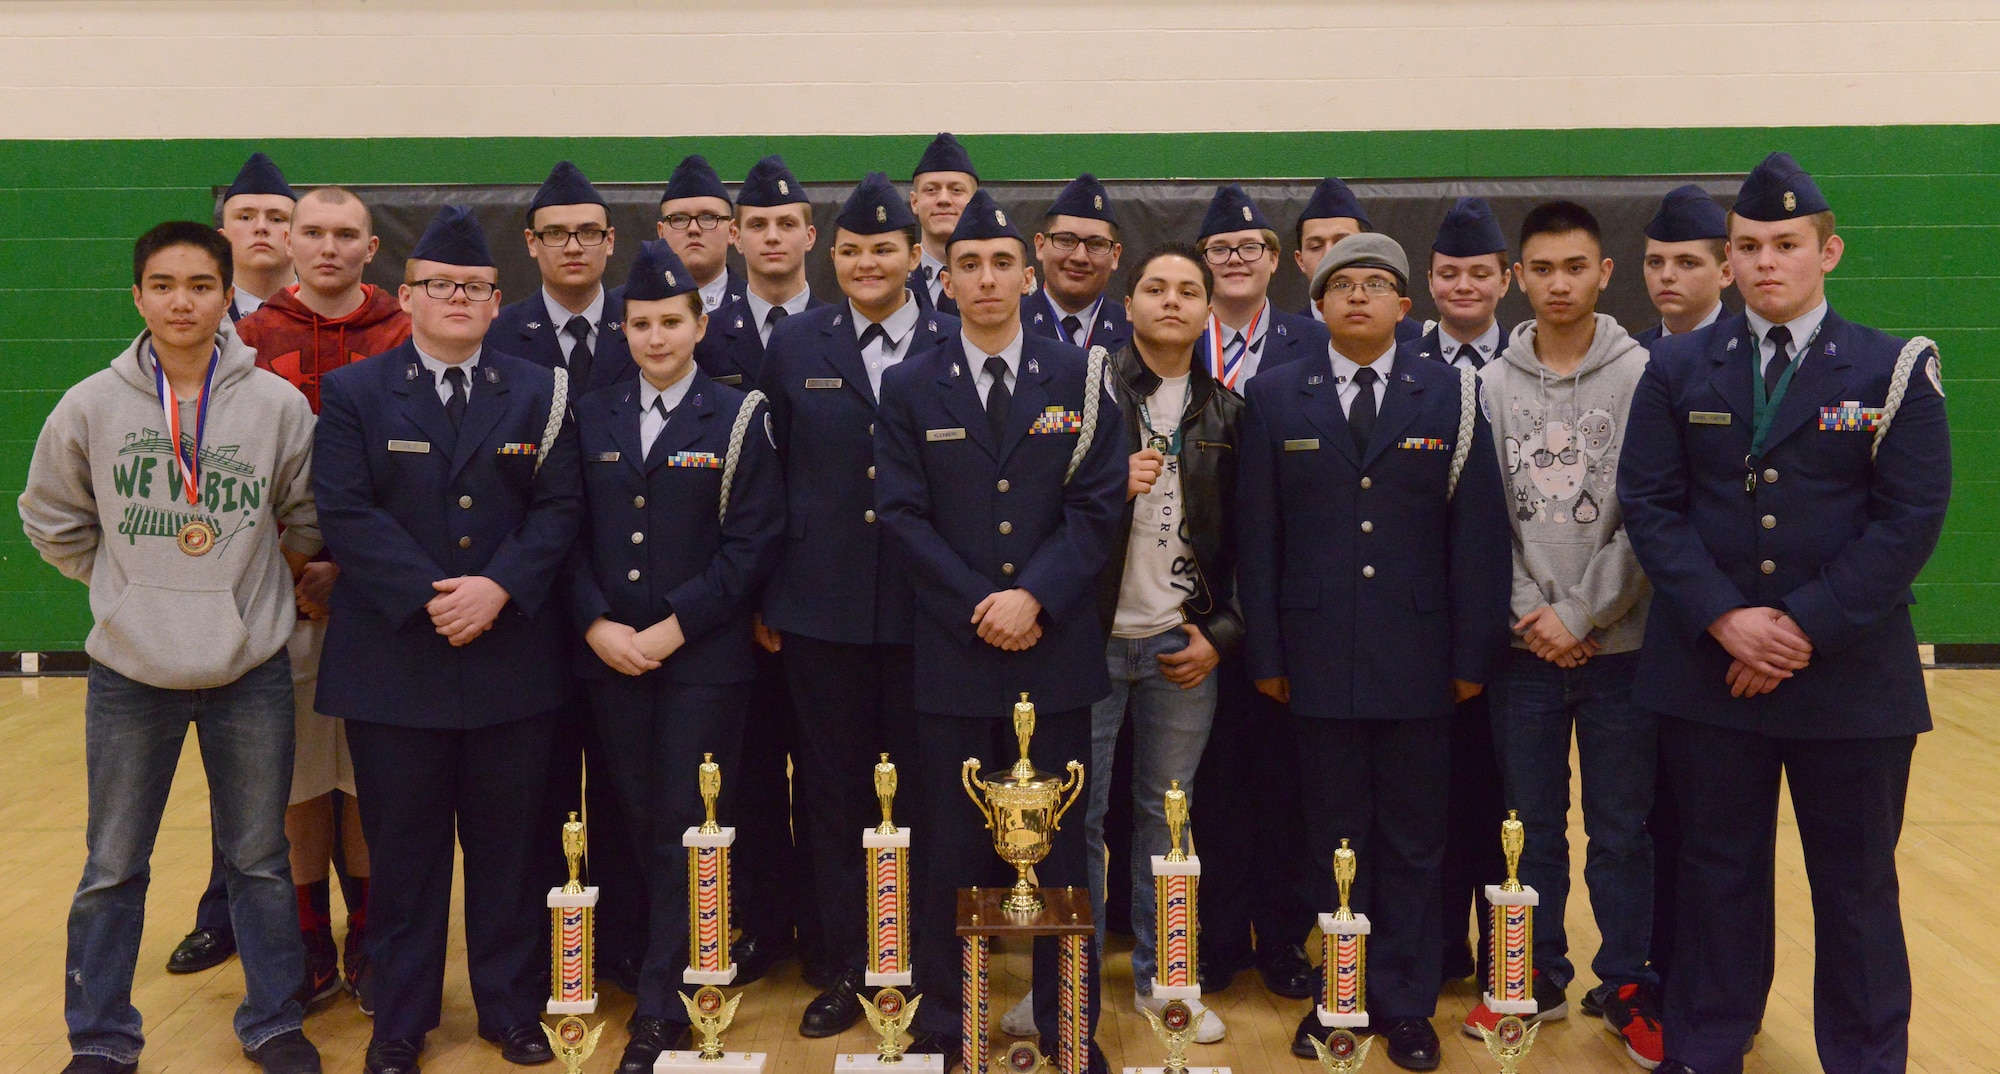 The Sioux City JROTC poses for a photo with their awards after the JROTC competition at North High School, Des Moines, Iowa on April 1, 2017. The Sioux City cadets worked hard throughout the day and succeeded in taking home second place. (U.S. Air National Guard photo by Airman Katelyn Sprott)